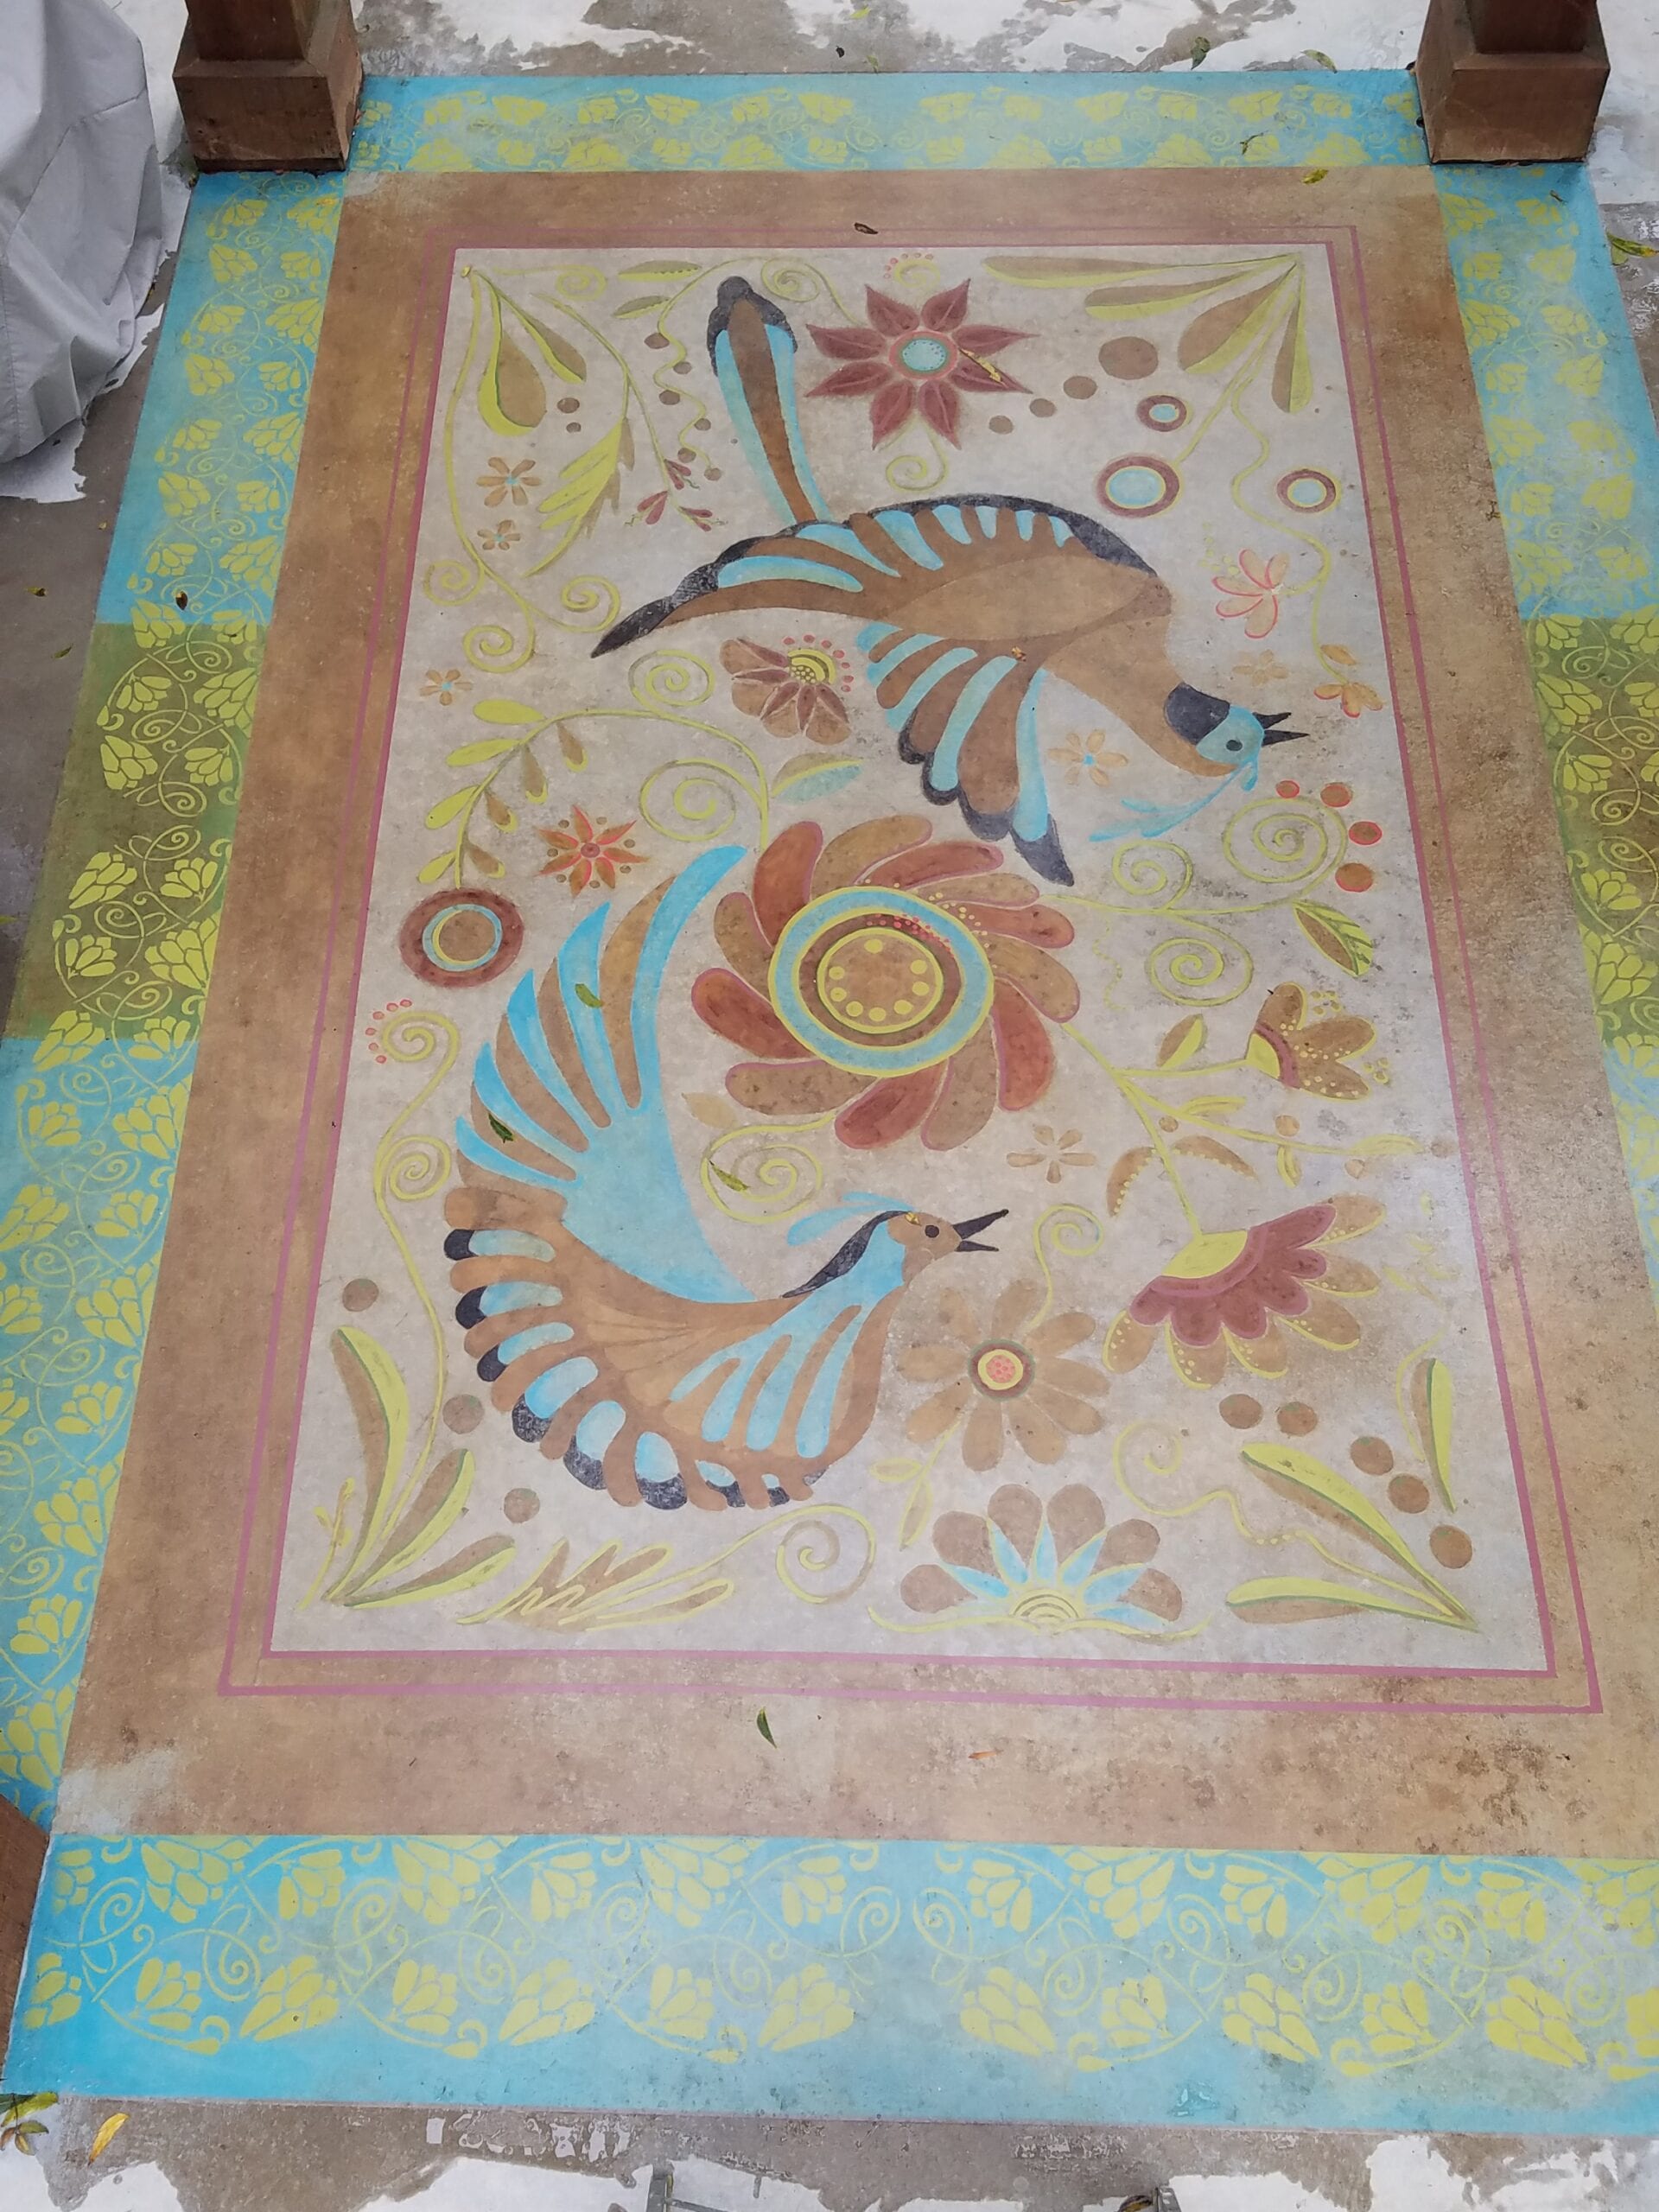 Concrete porch floor with a bird stencil design, made to look like a colorful rug using our DecoGel acid stains